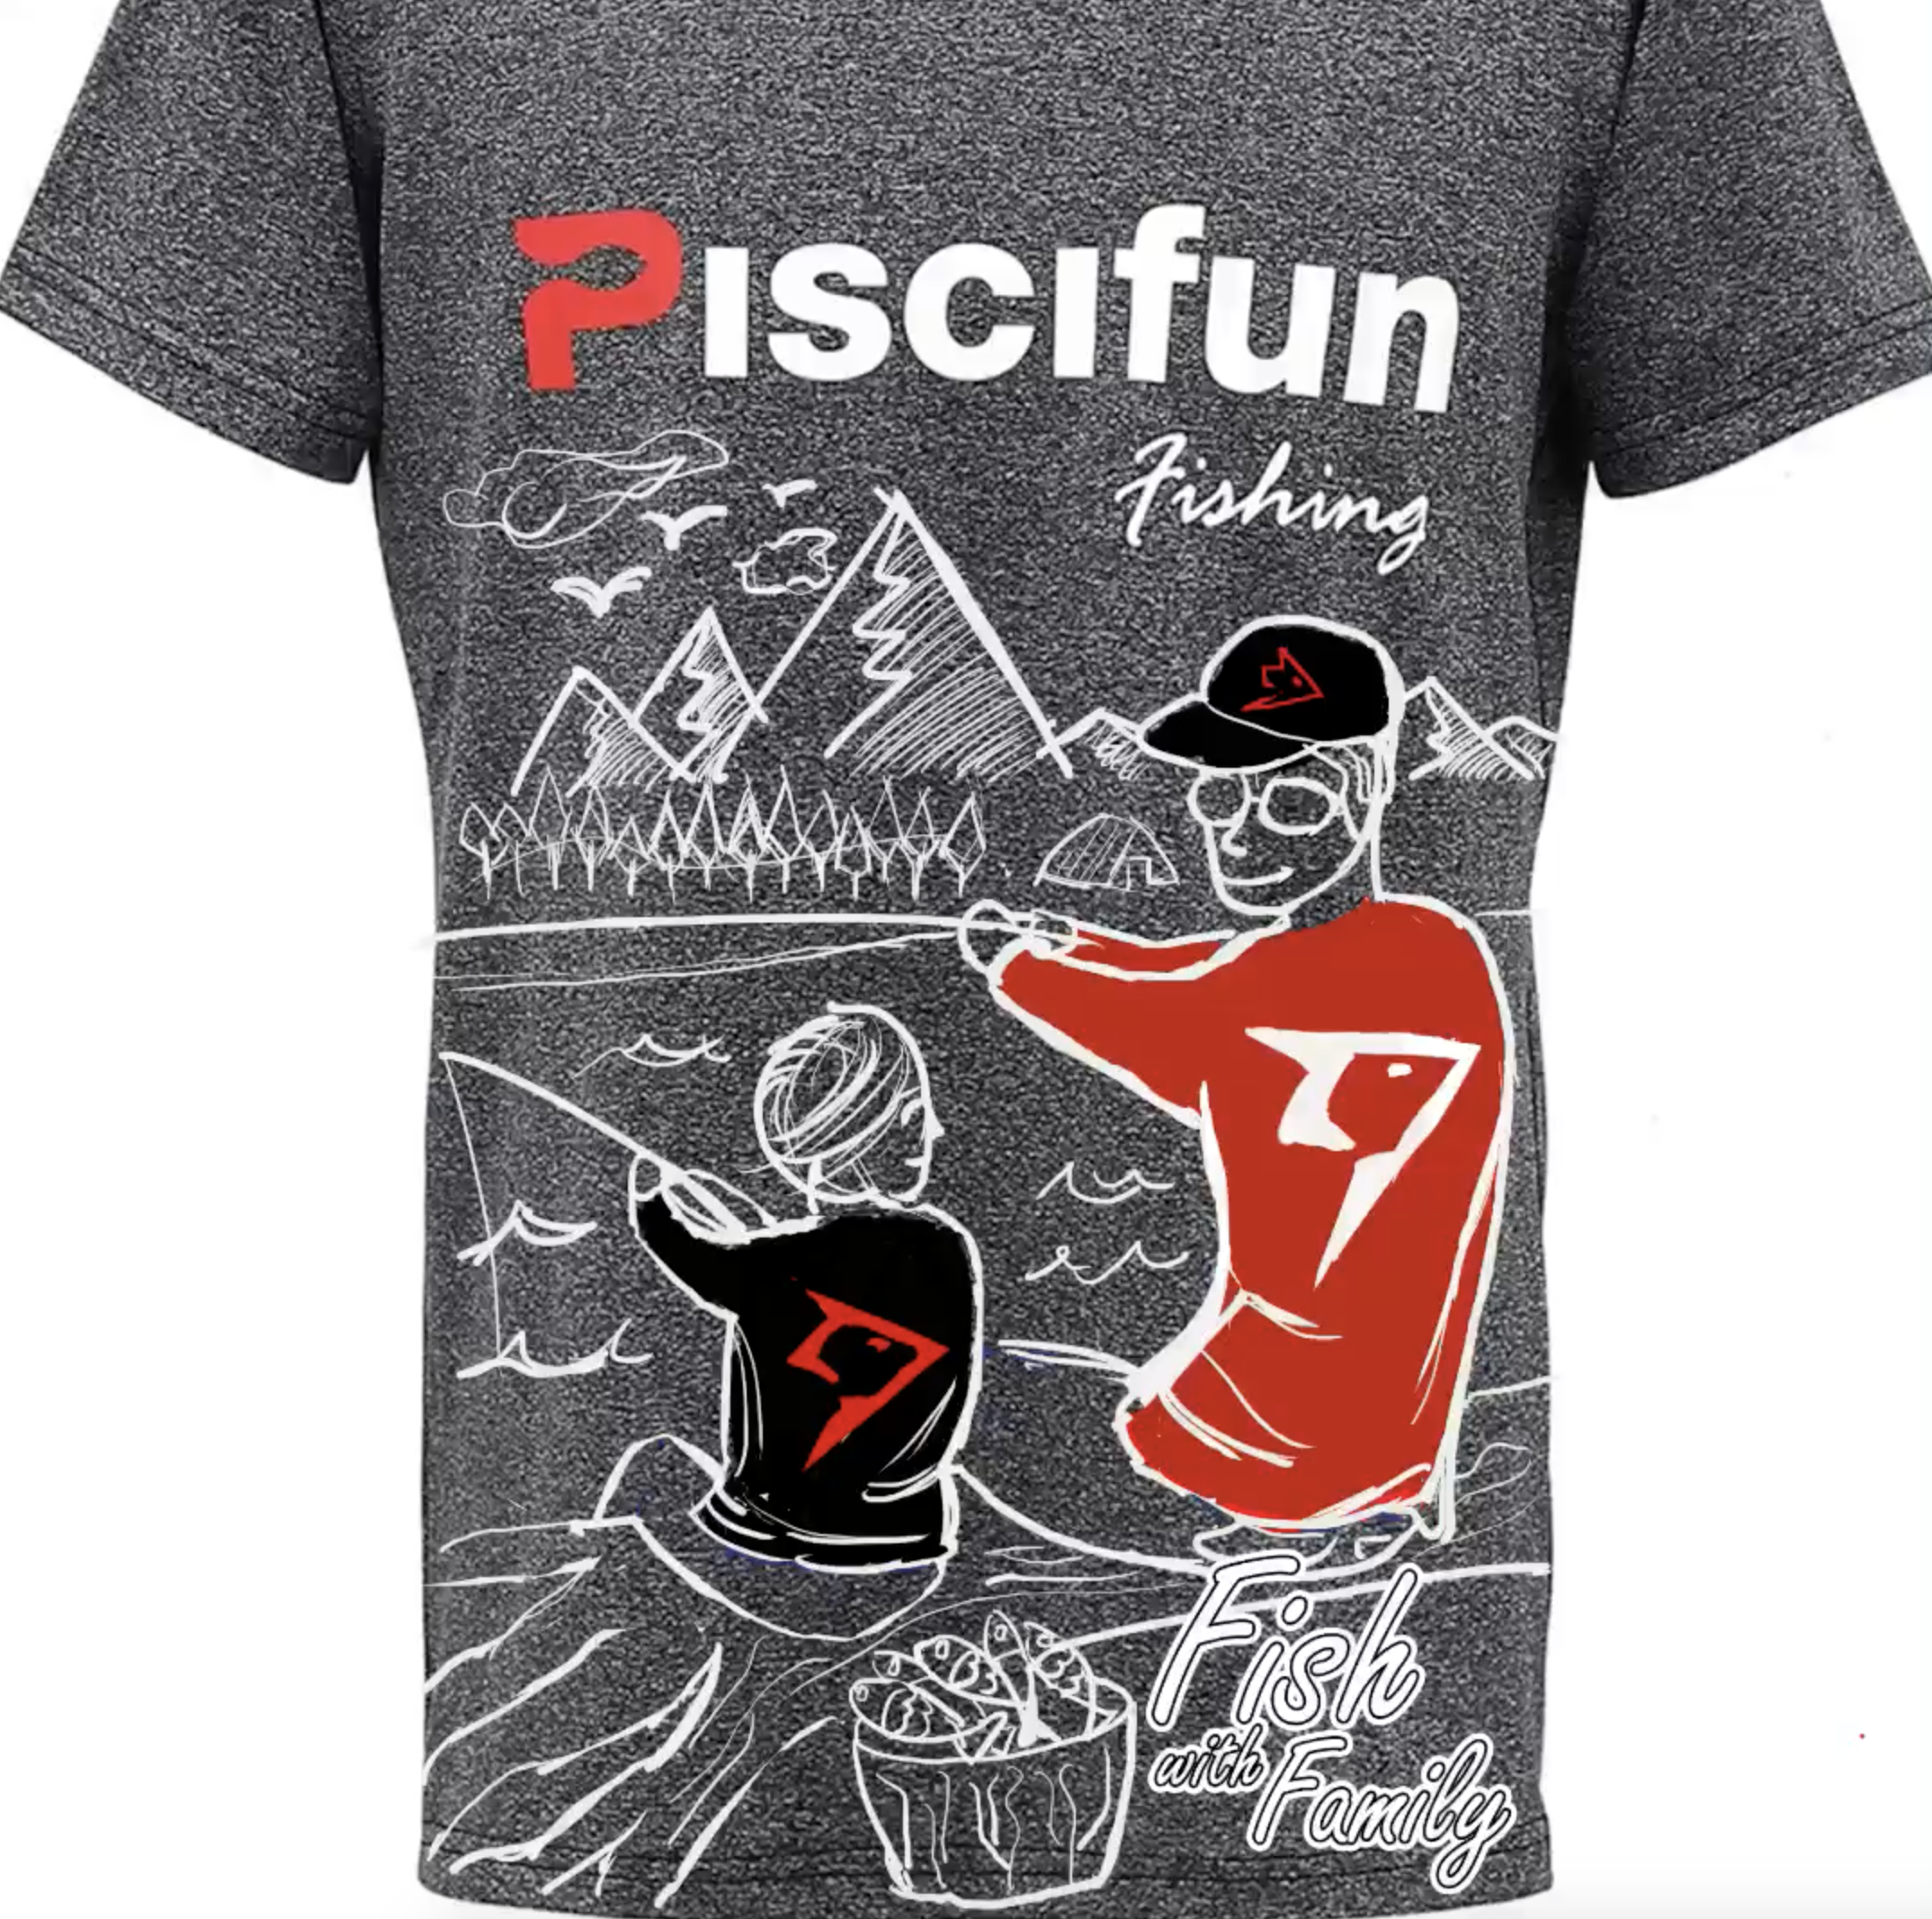 Piscifun New Logo Paint and Win Contest. NEW Branding, BIG Contest